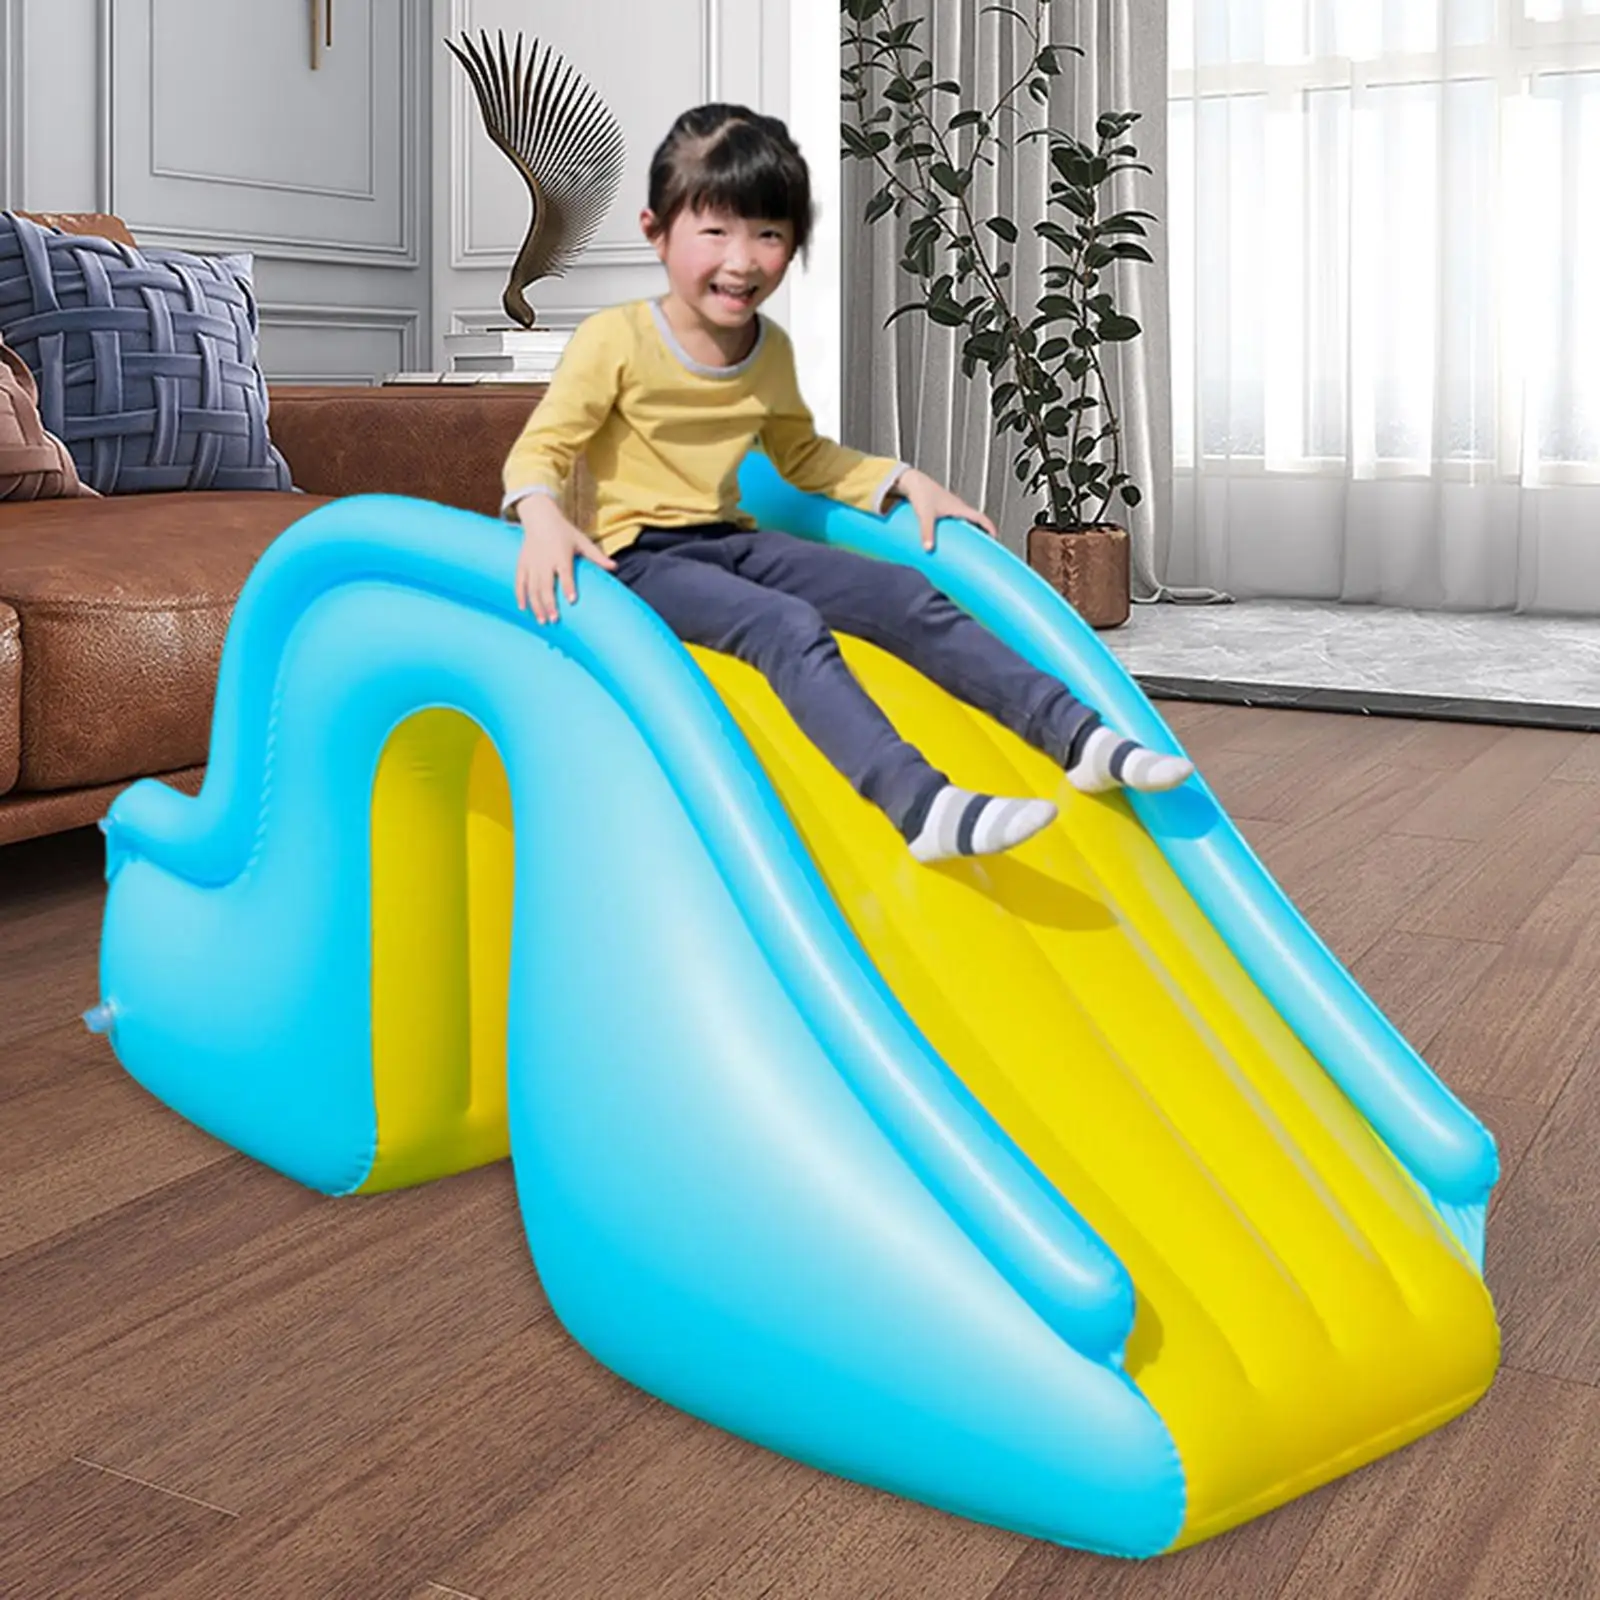 Inflatable Slide Strong Water Park for Water Play Toys Paddling Pool Outdoor